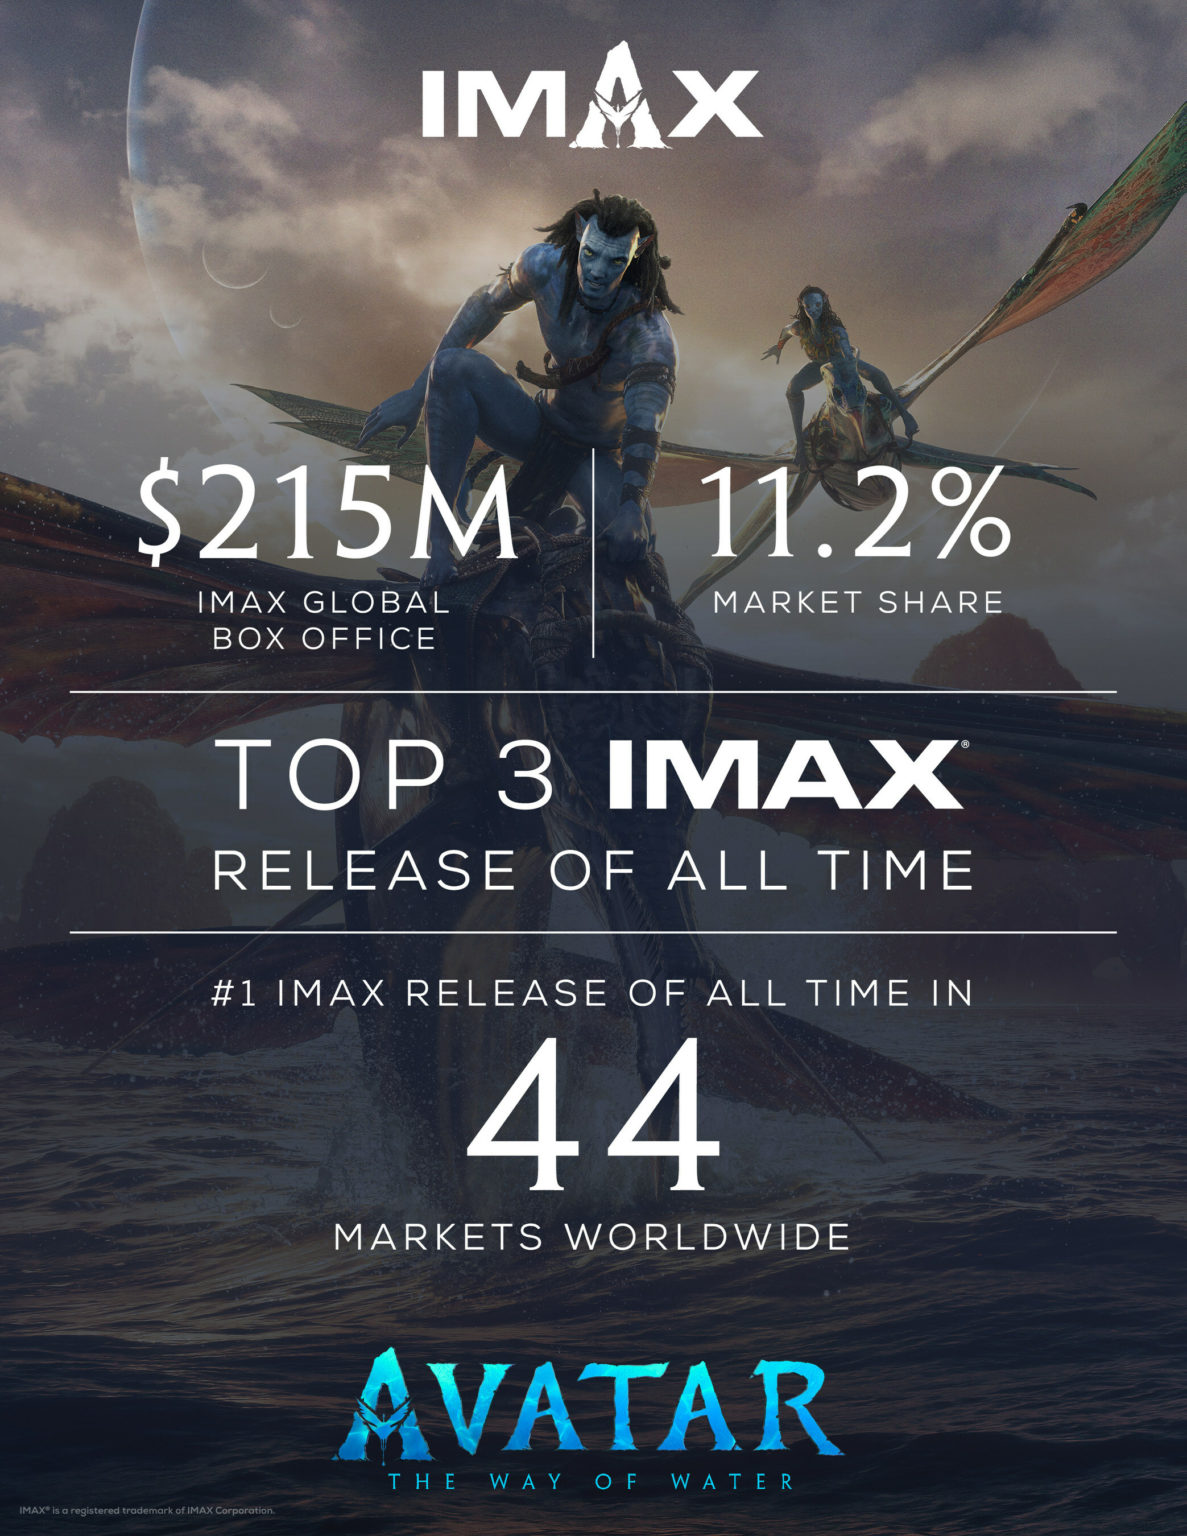 Avatar The Way Of Water Hits Top Three Imax Releases Of All Time With 215m Boxoffice 1952